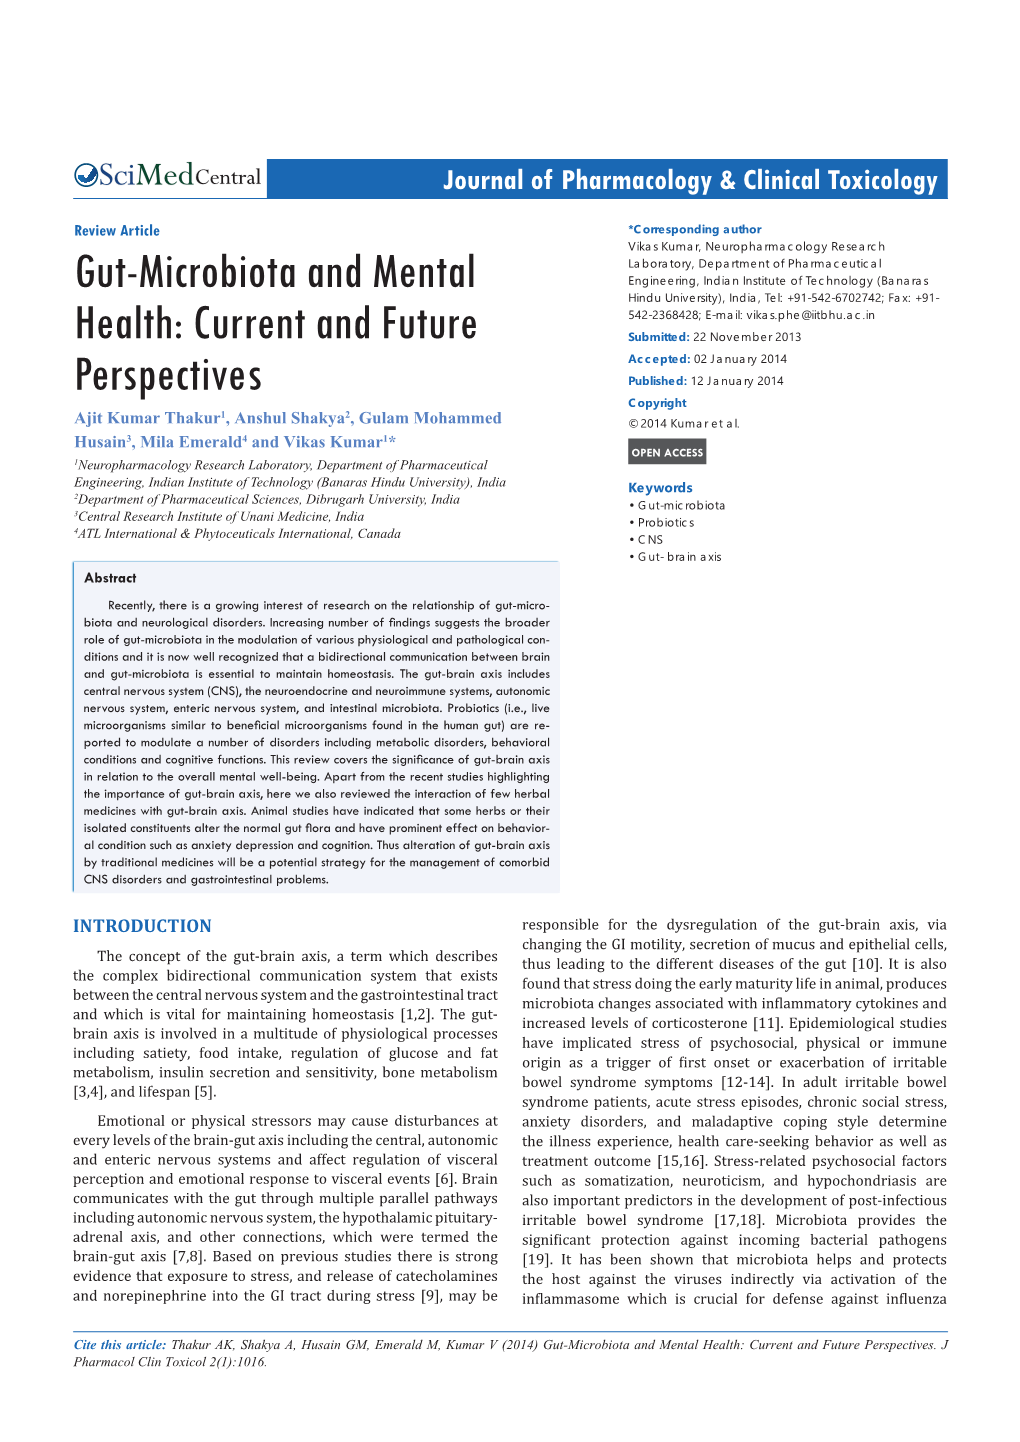 Gut-Microbiota and Mental Health: Current and Future Perspectives